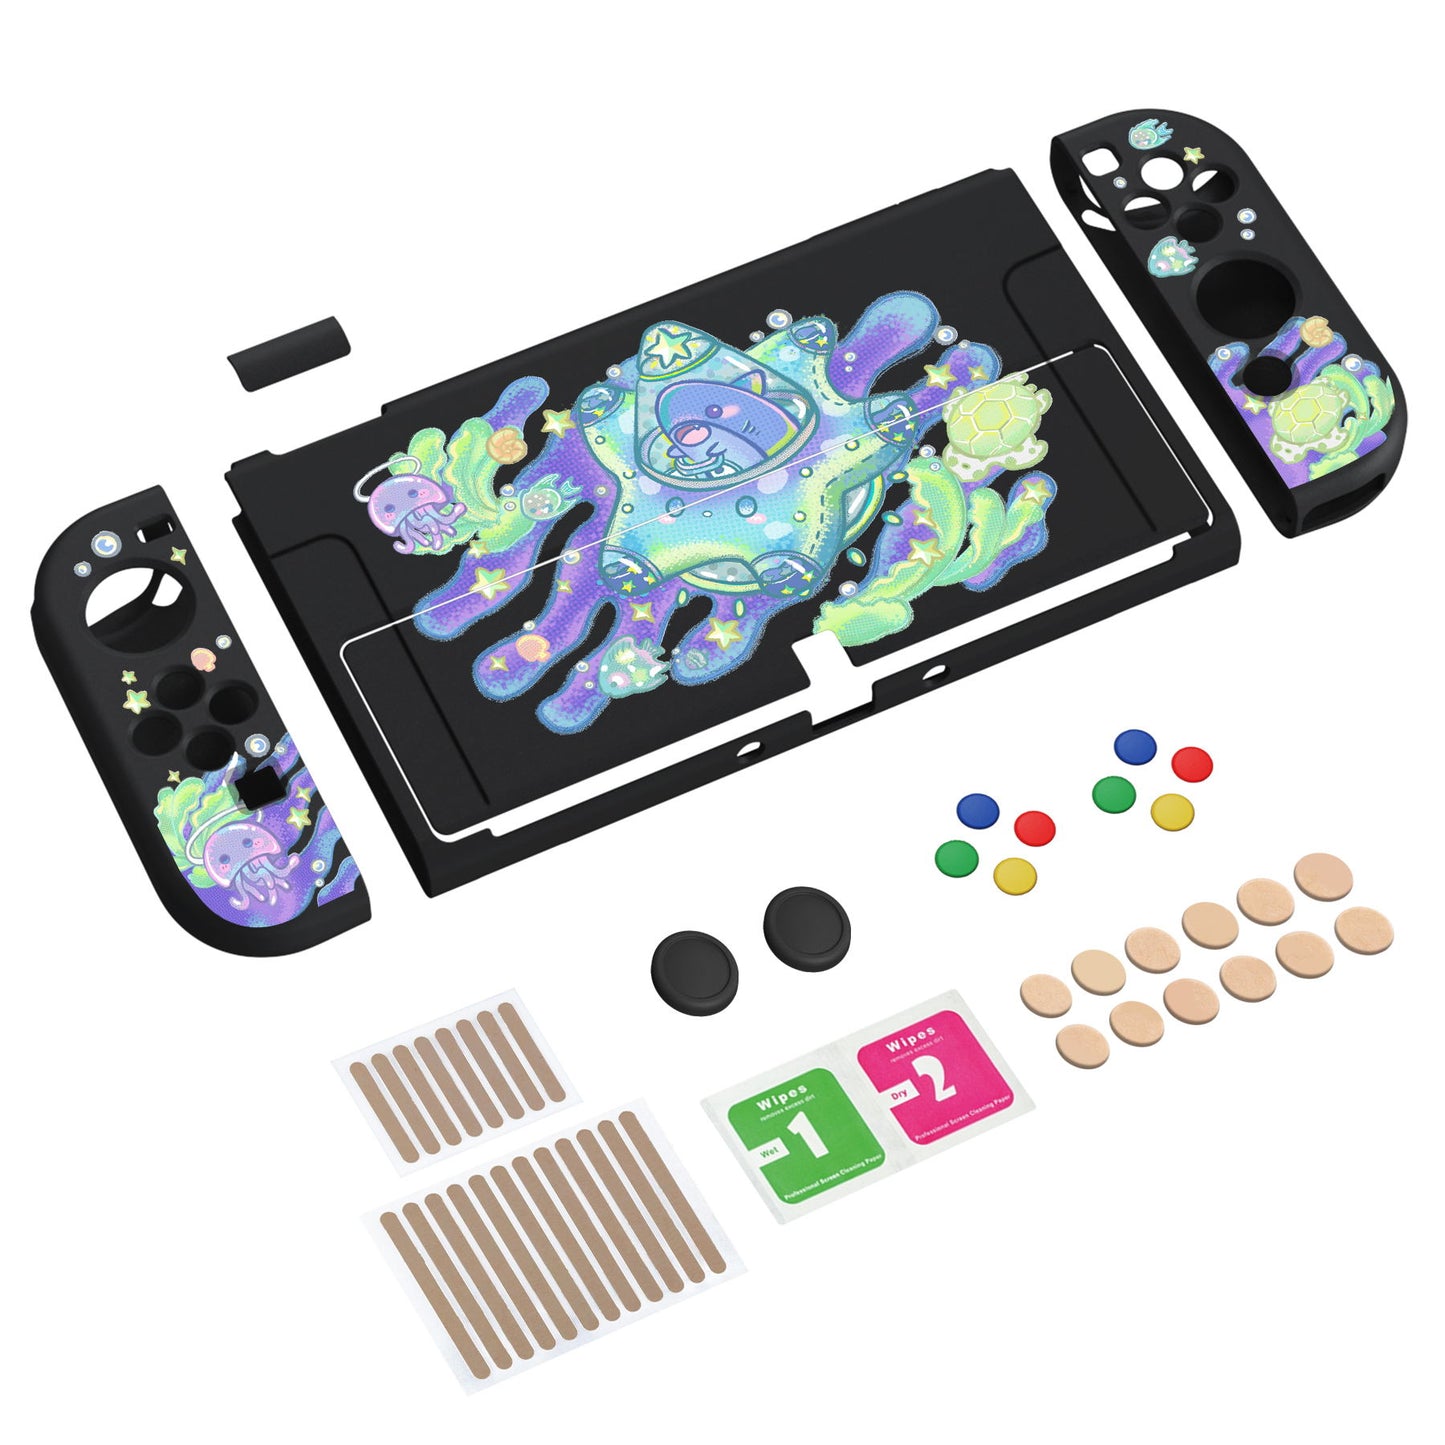 PlayVital ZealProtect Soft Protective Case for Switch OLED, Flexible Protector Joycon Grip Cover for Switch OLED with Thumb Grip Caps & ABXY Direction Button Caps - Shark Quest - XSOYV6030 playvital